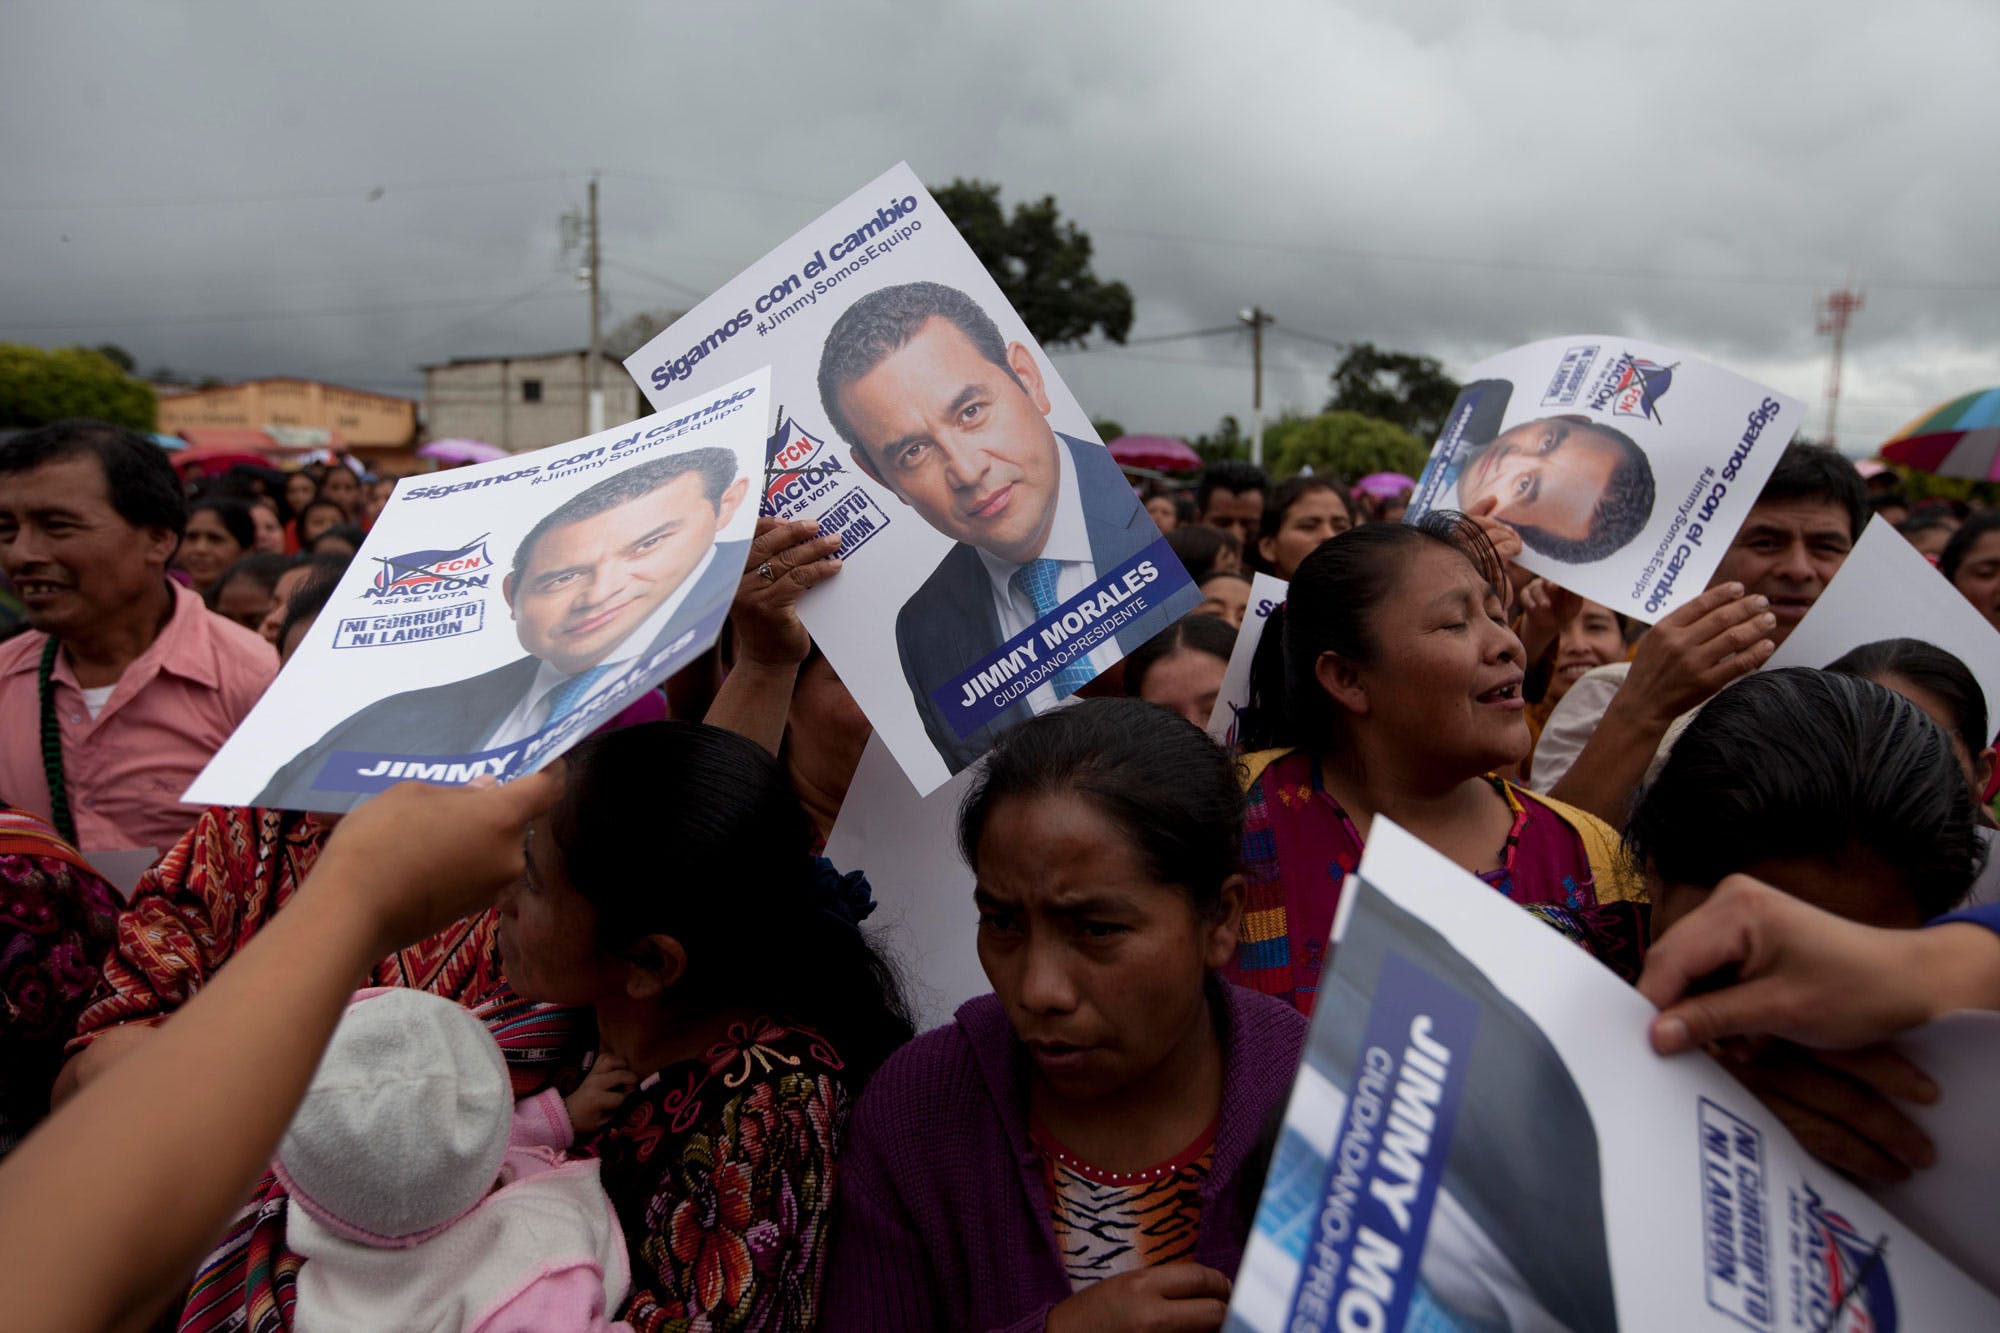 Campaign posters featuring presidential candidate Jimmy Morales of the National Front of Convergence party, are passed out during a rally, in Chichicastenango, Guatemala, Saturday, Oct. 17, 2015. Voters will head to the polls on Oct. 25 to choose a new leader in the presidential run-off. (AP Photo/Moises Castillo)